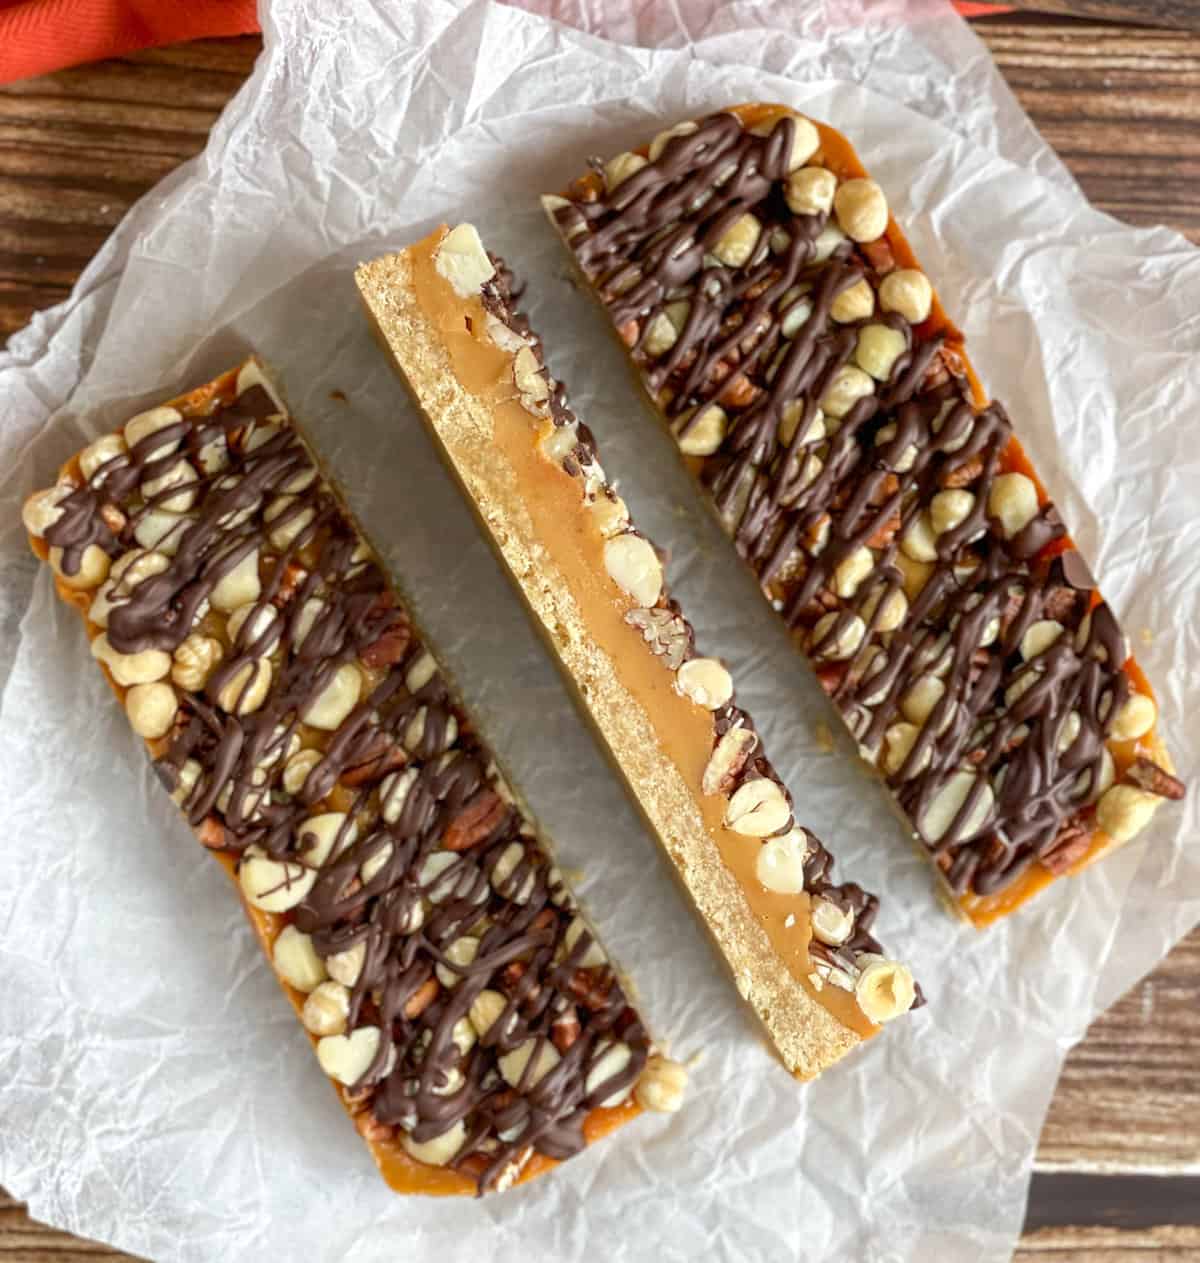 Cross section of caramel nut slice drizzled in chocolate 